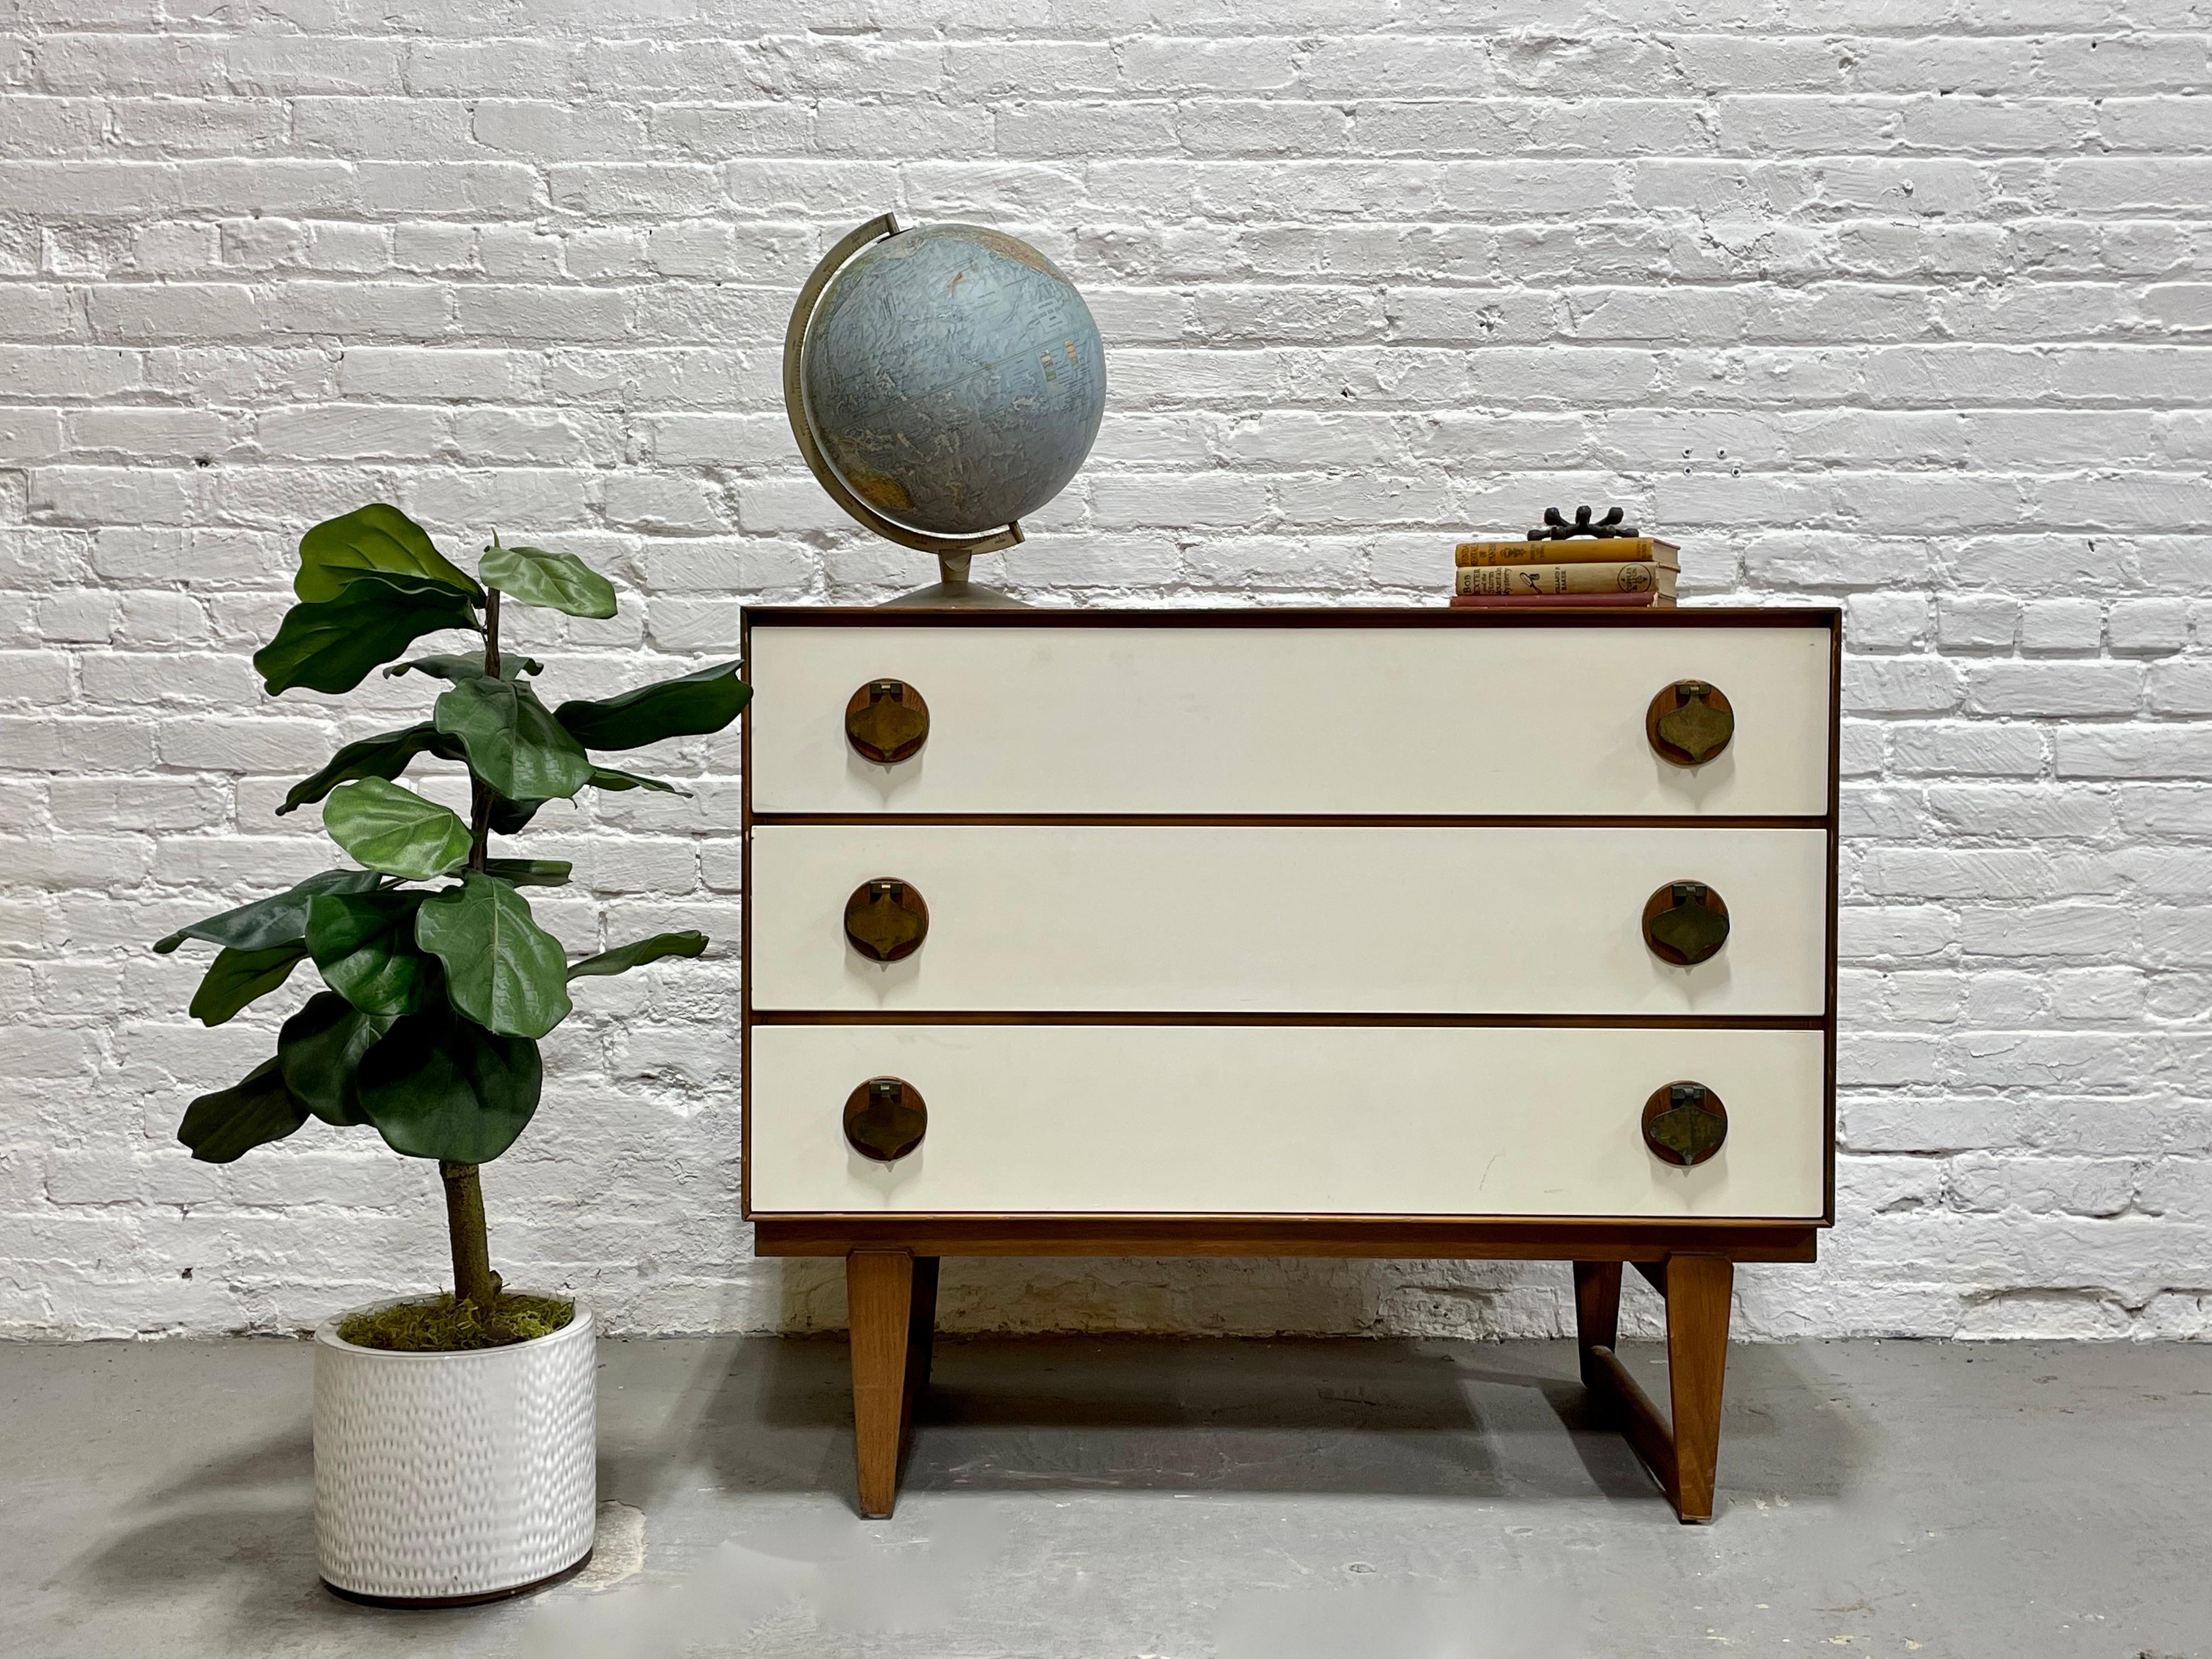 Rare + Original Mid Century Modern White & Walnut Dresser by Stanley Furniture Co., c. 1960's. This elusive series was in limited production and is incredibly hard to find. The dresser is highlighted by solid brass spade pulls over solid walnut